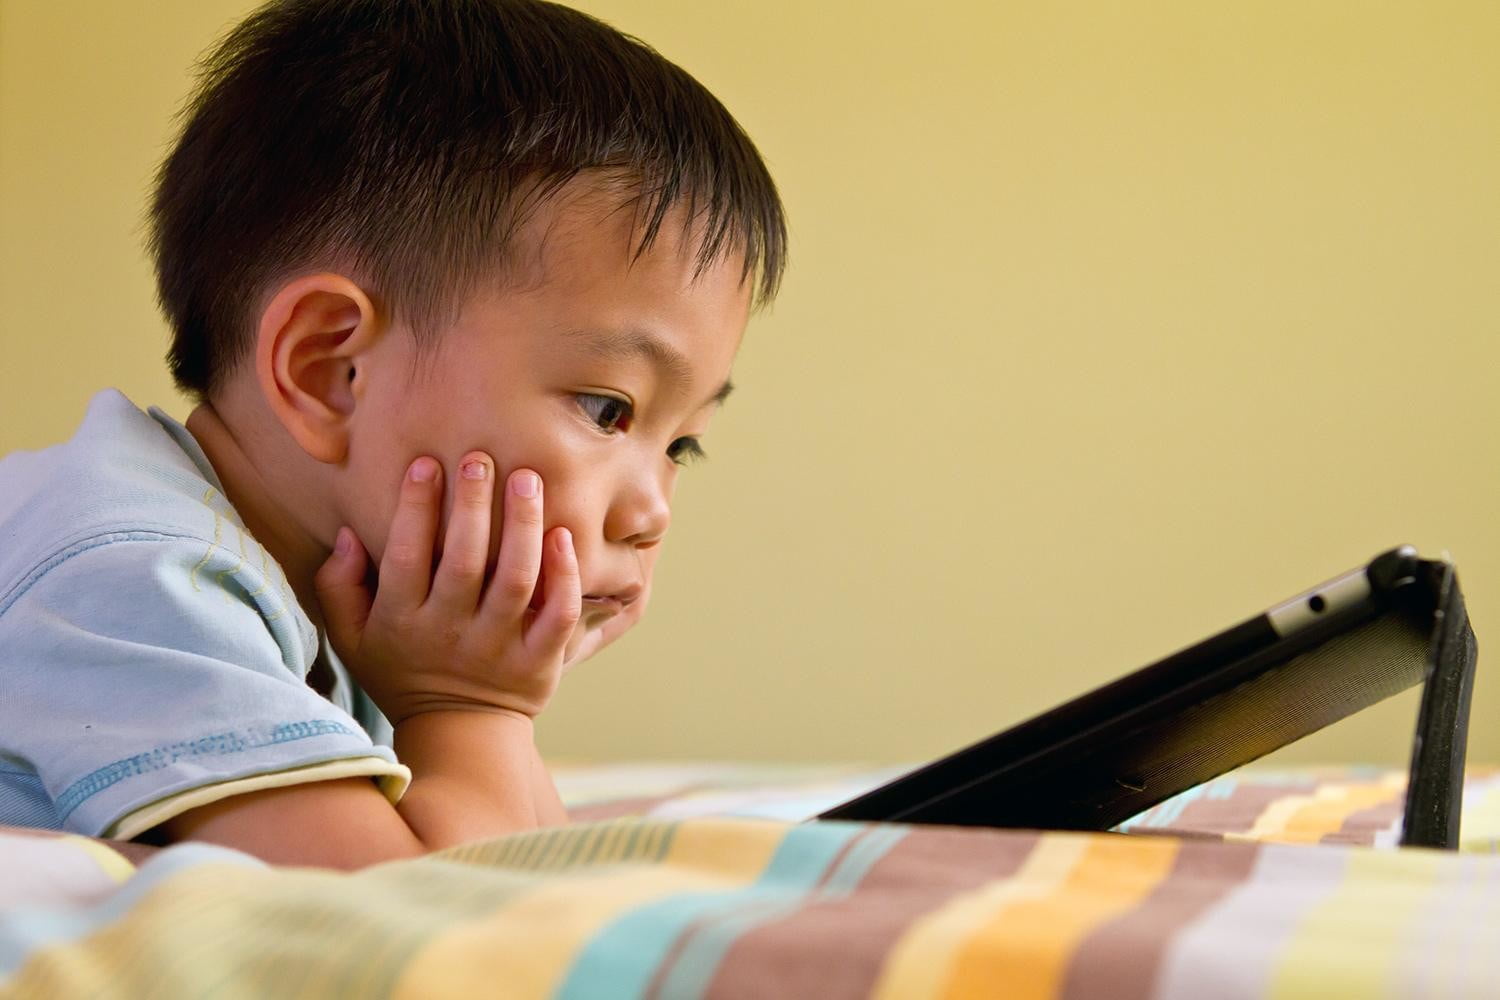 How To Cope With Kids’ Increased Screen Time During the Pandemic